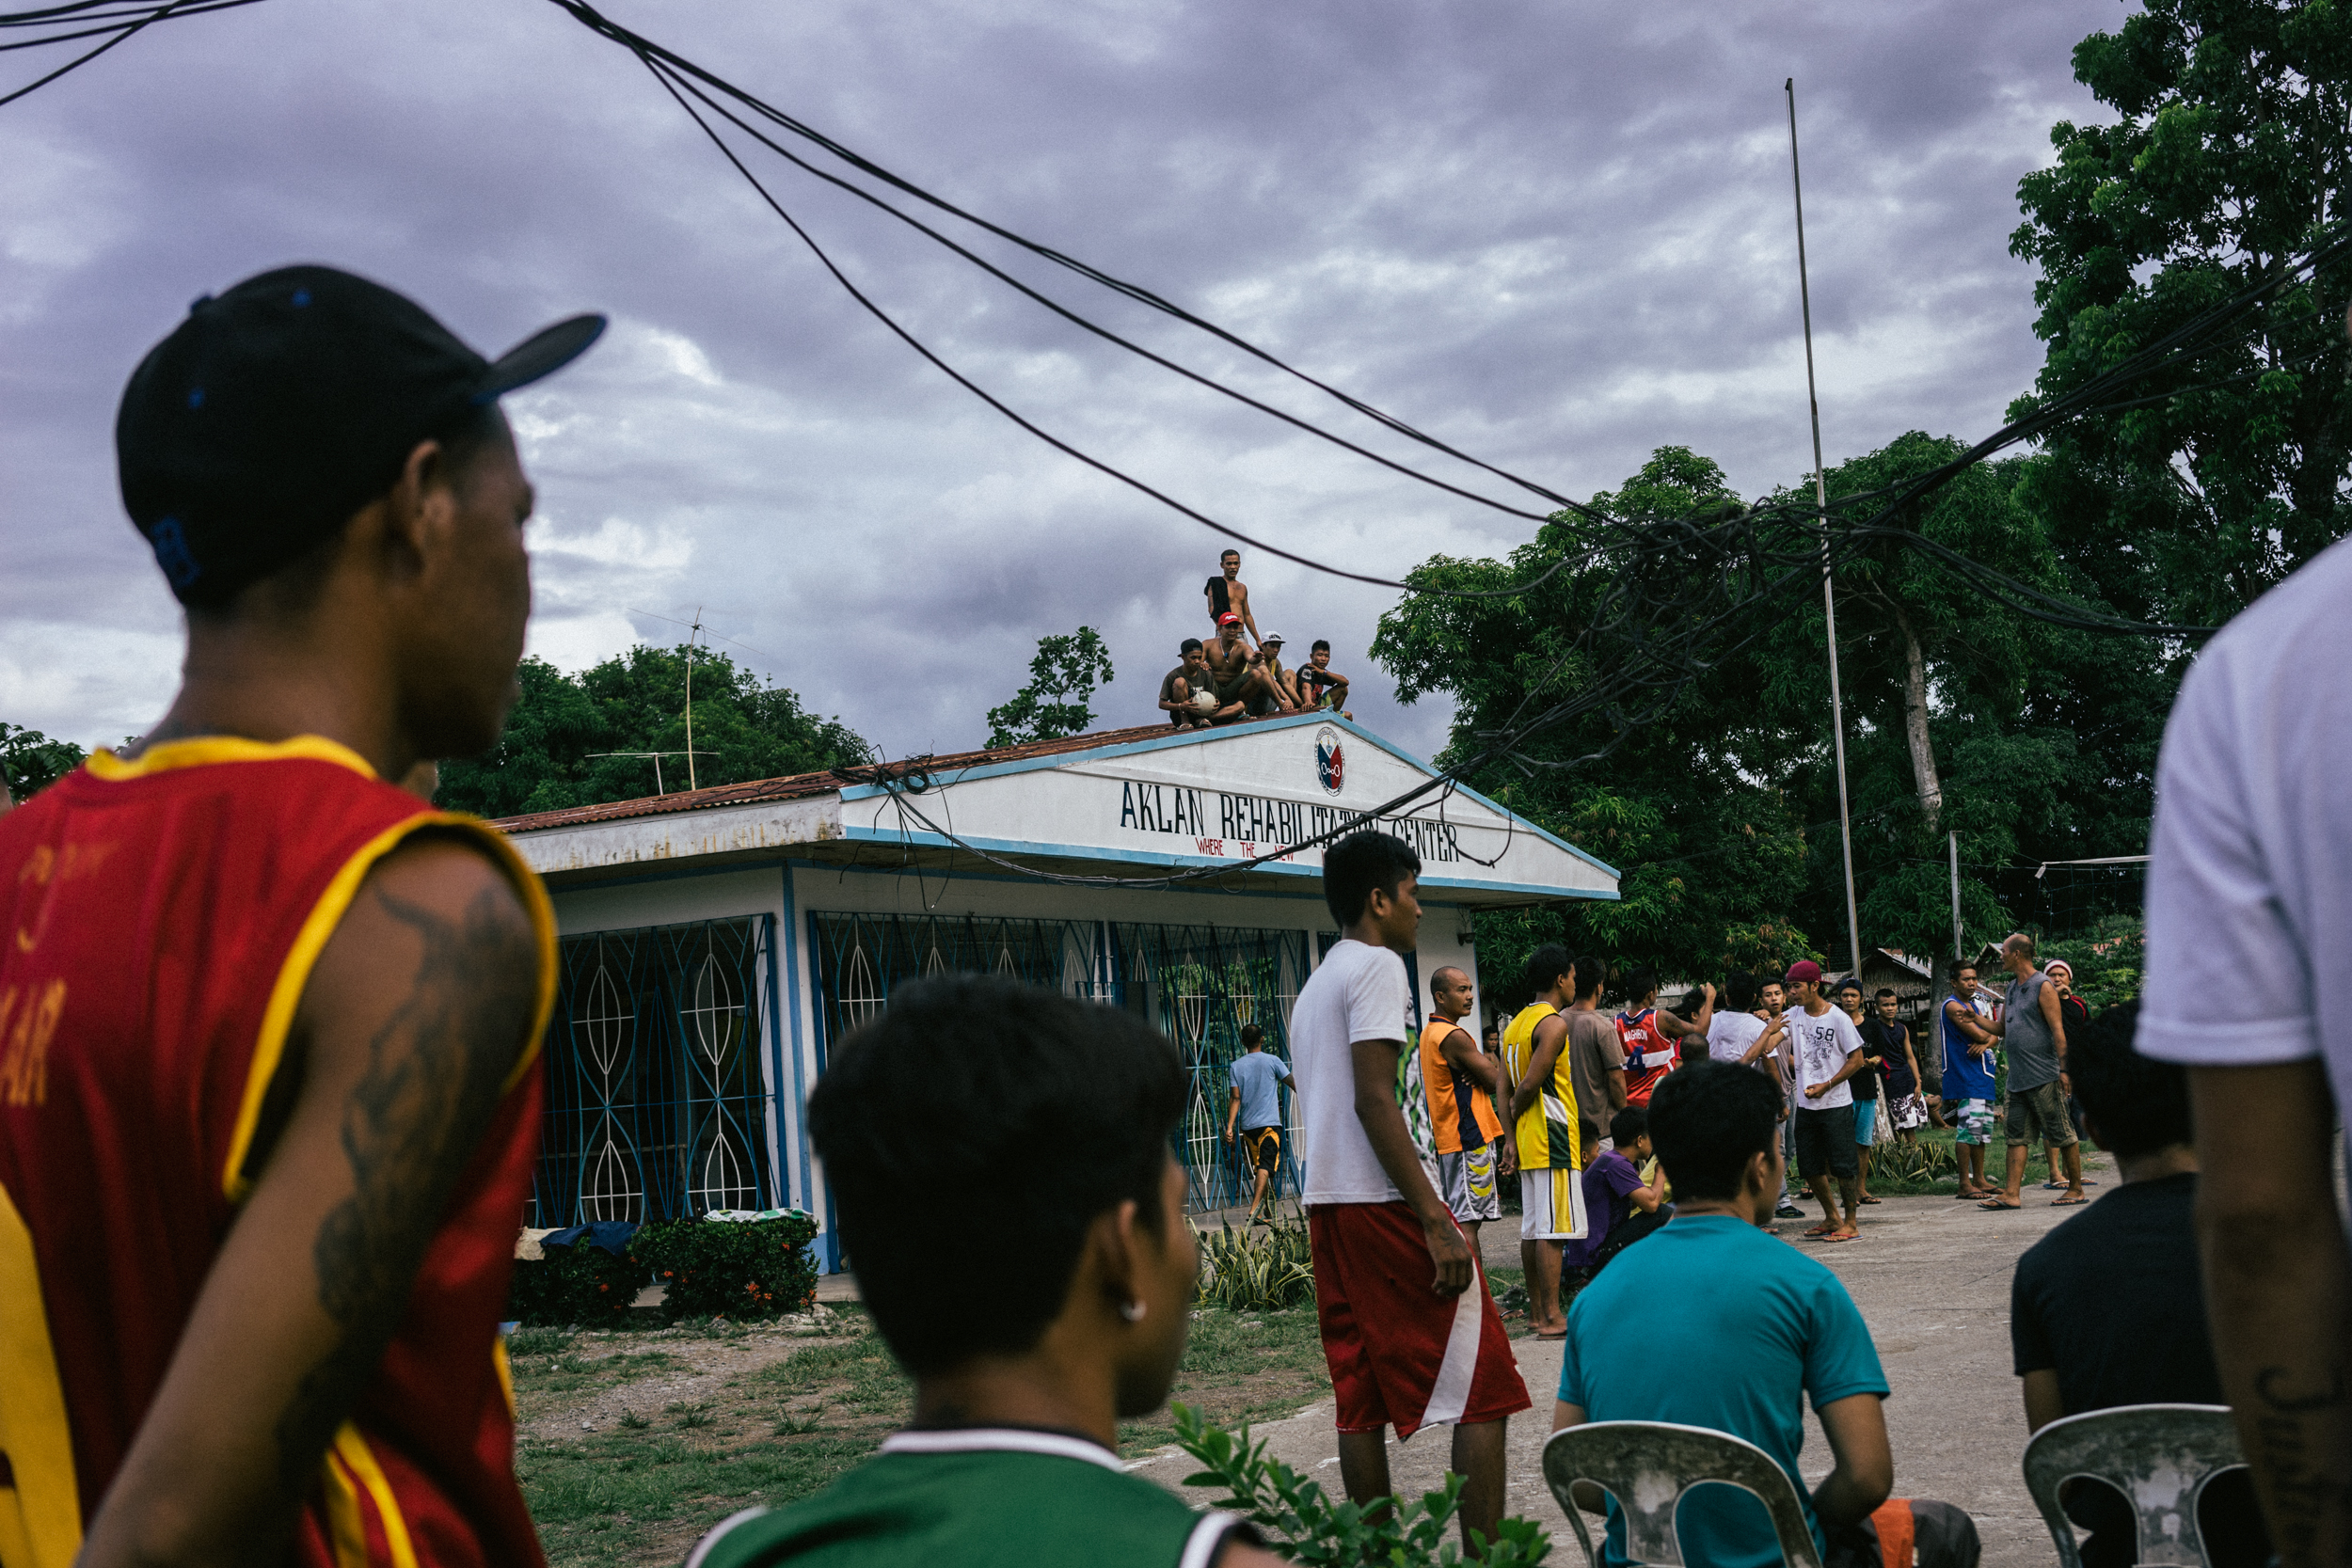  Kalibo, Philippines - September 20, 2015: Men are seen at a local jail. The jail is now home to Celia Robelo, who is being charged for human trafficking and illegal recruitment, following the death of a Filipino seafarer. Robelo claims that she did 